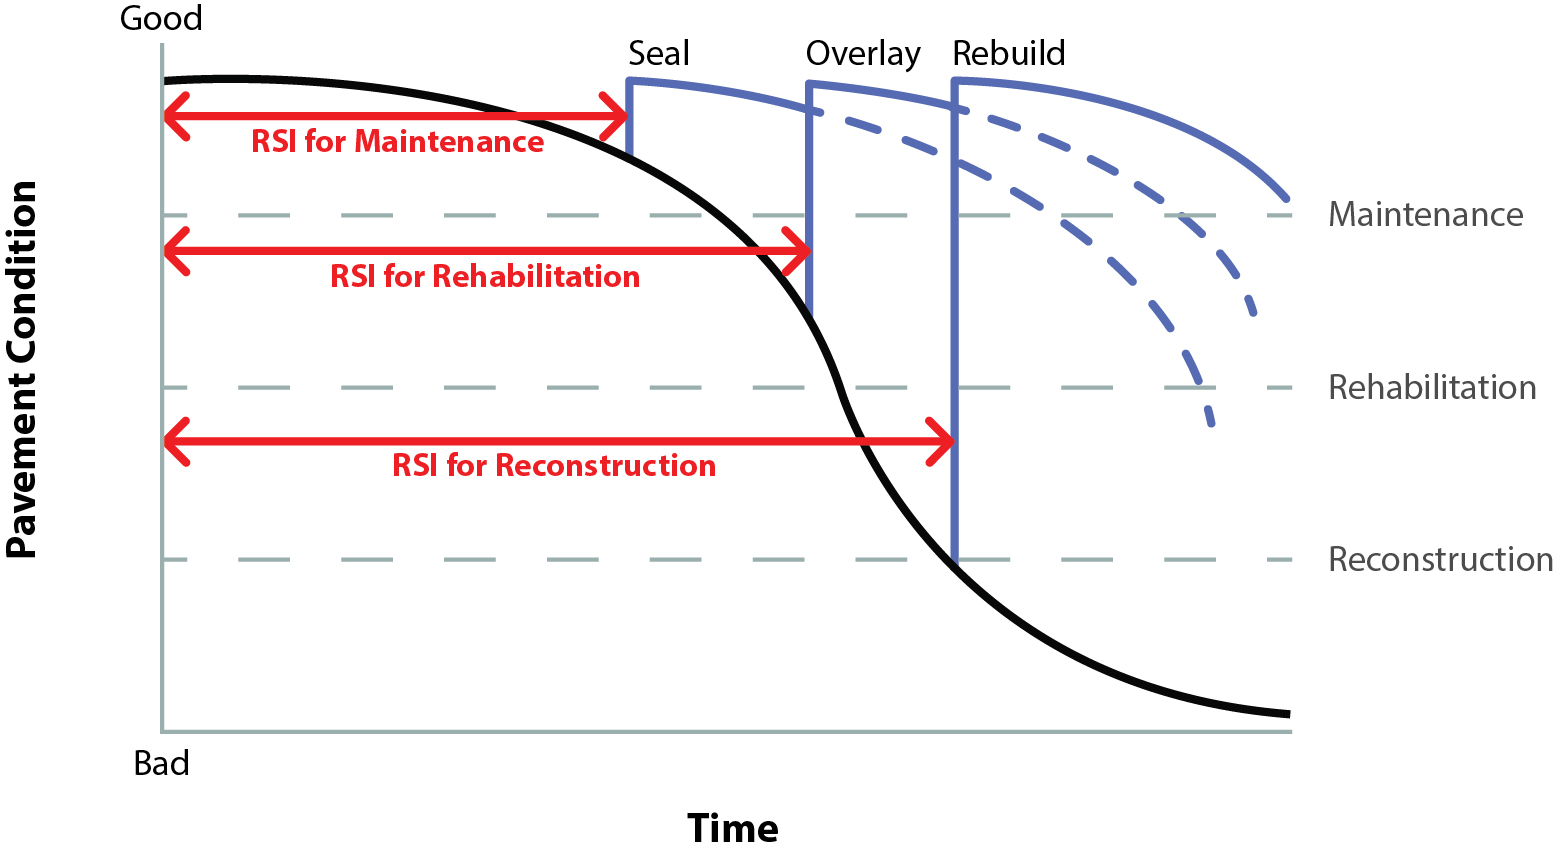 Illustration of possible remaining service intervals (RSI) for different categories of treatments based on pavement condition.